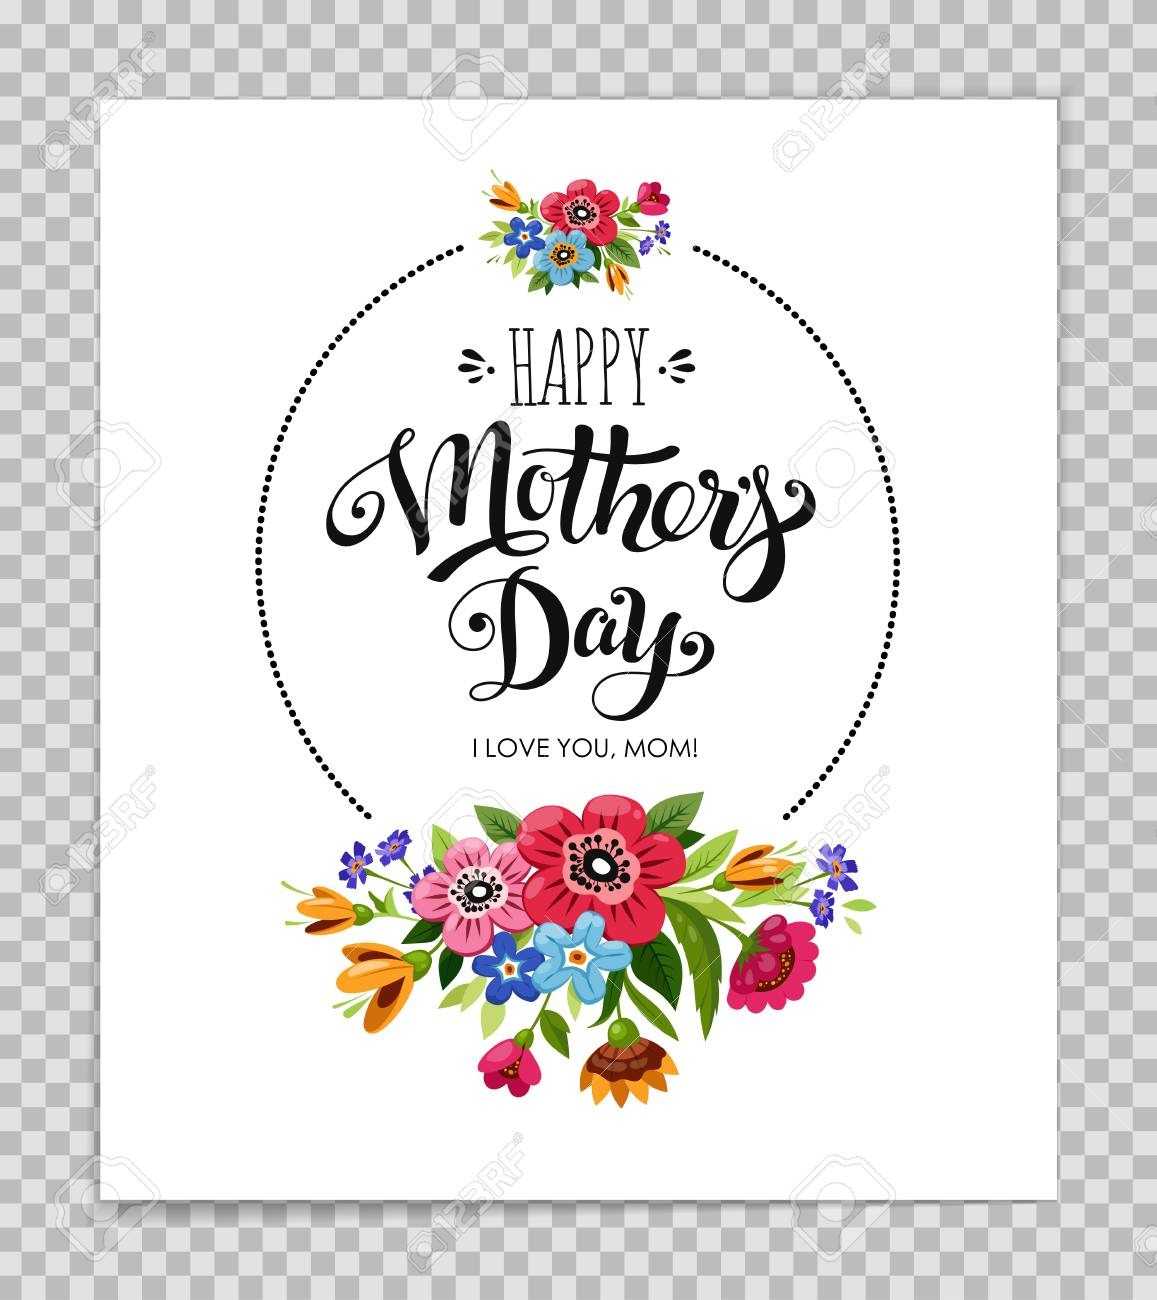 Mothers Day Card Template With Floral Design On Transparent Background. Intended For Mothers Day Card Templates